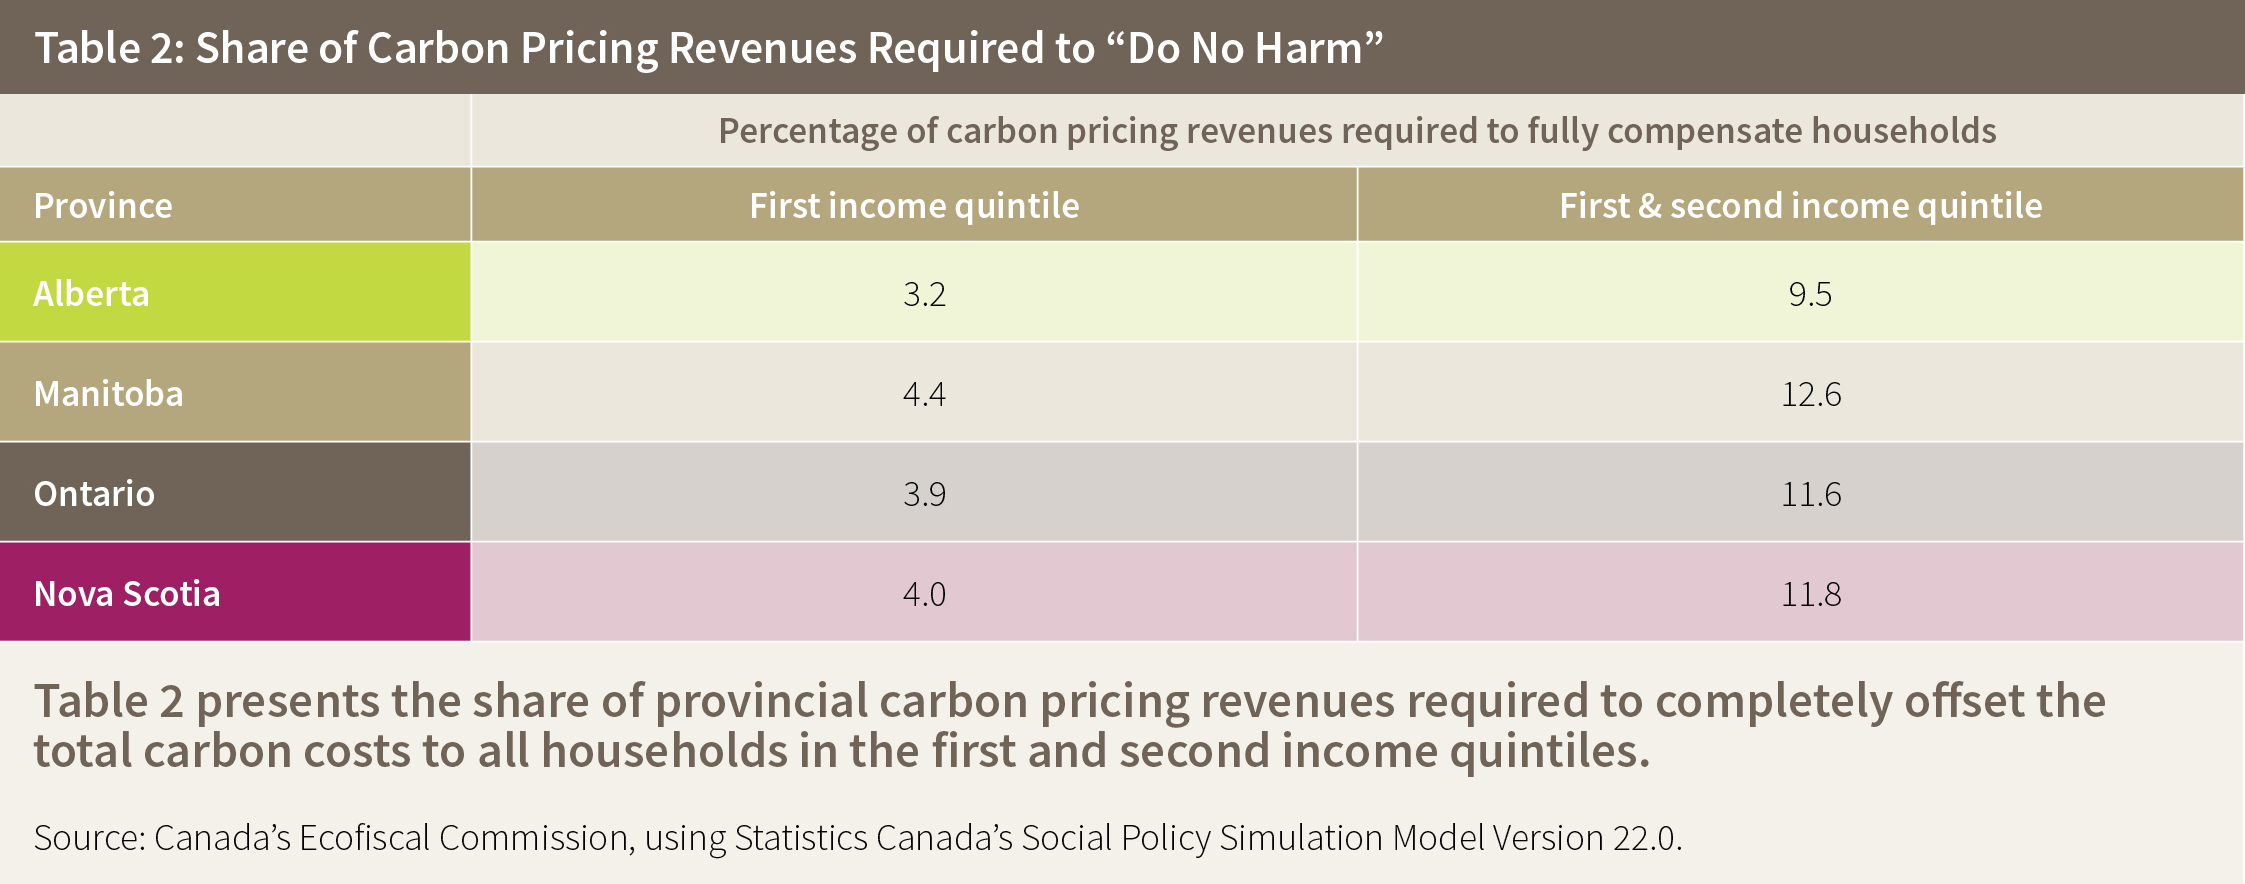 Table 2: Share of Carbon Pricing Revenues Required to "Do No Harm"